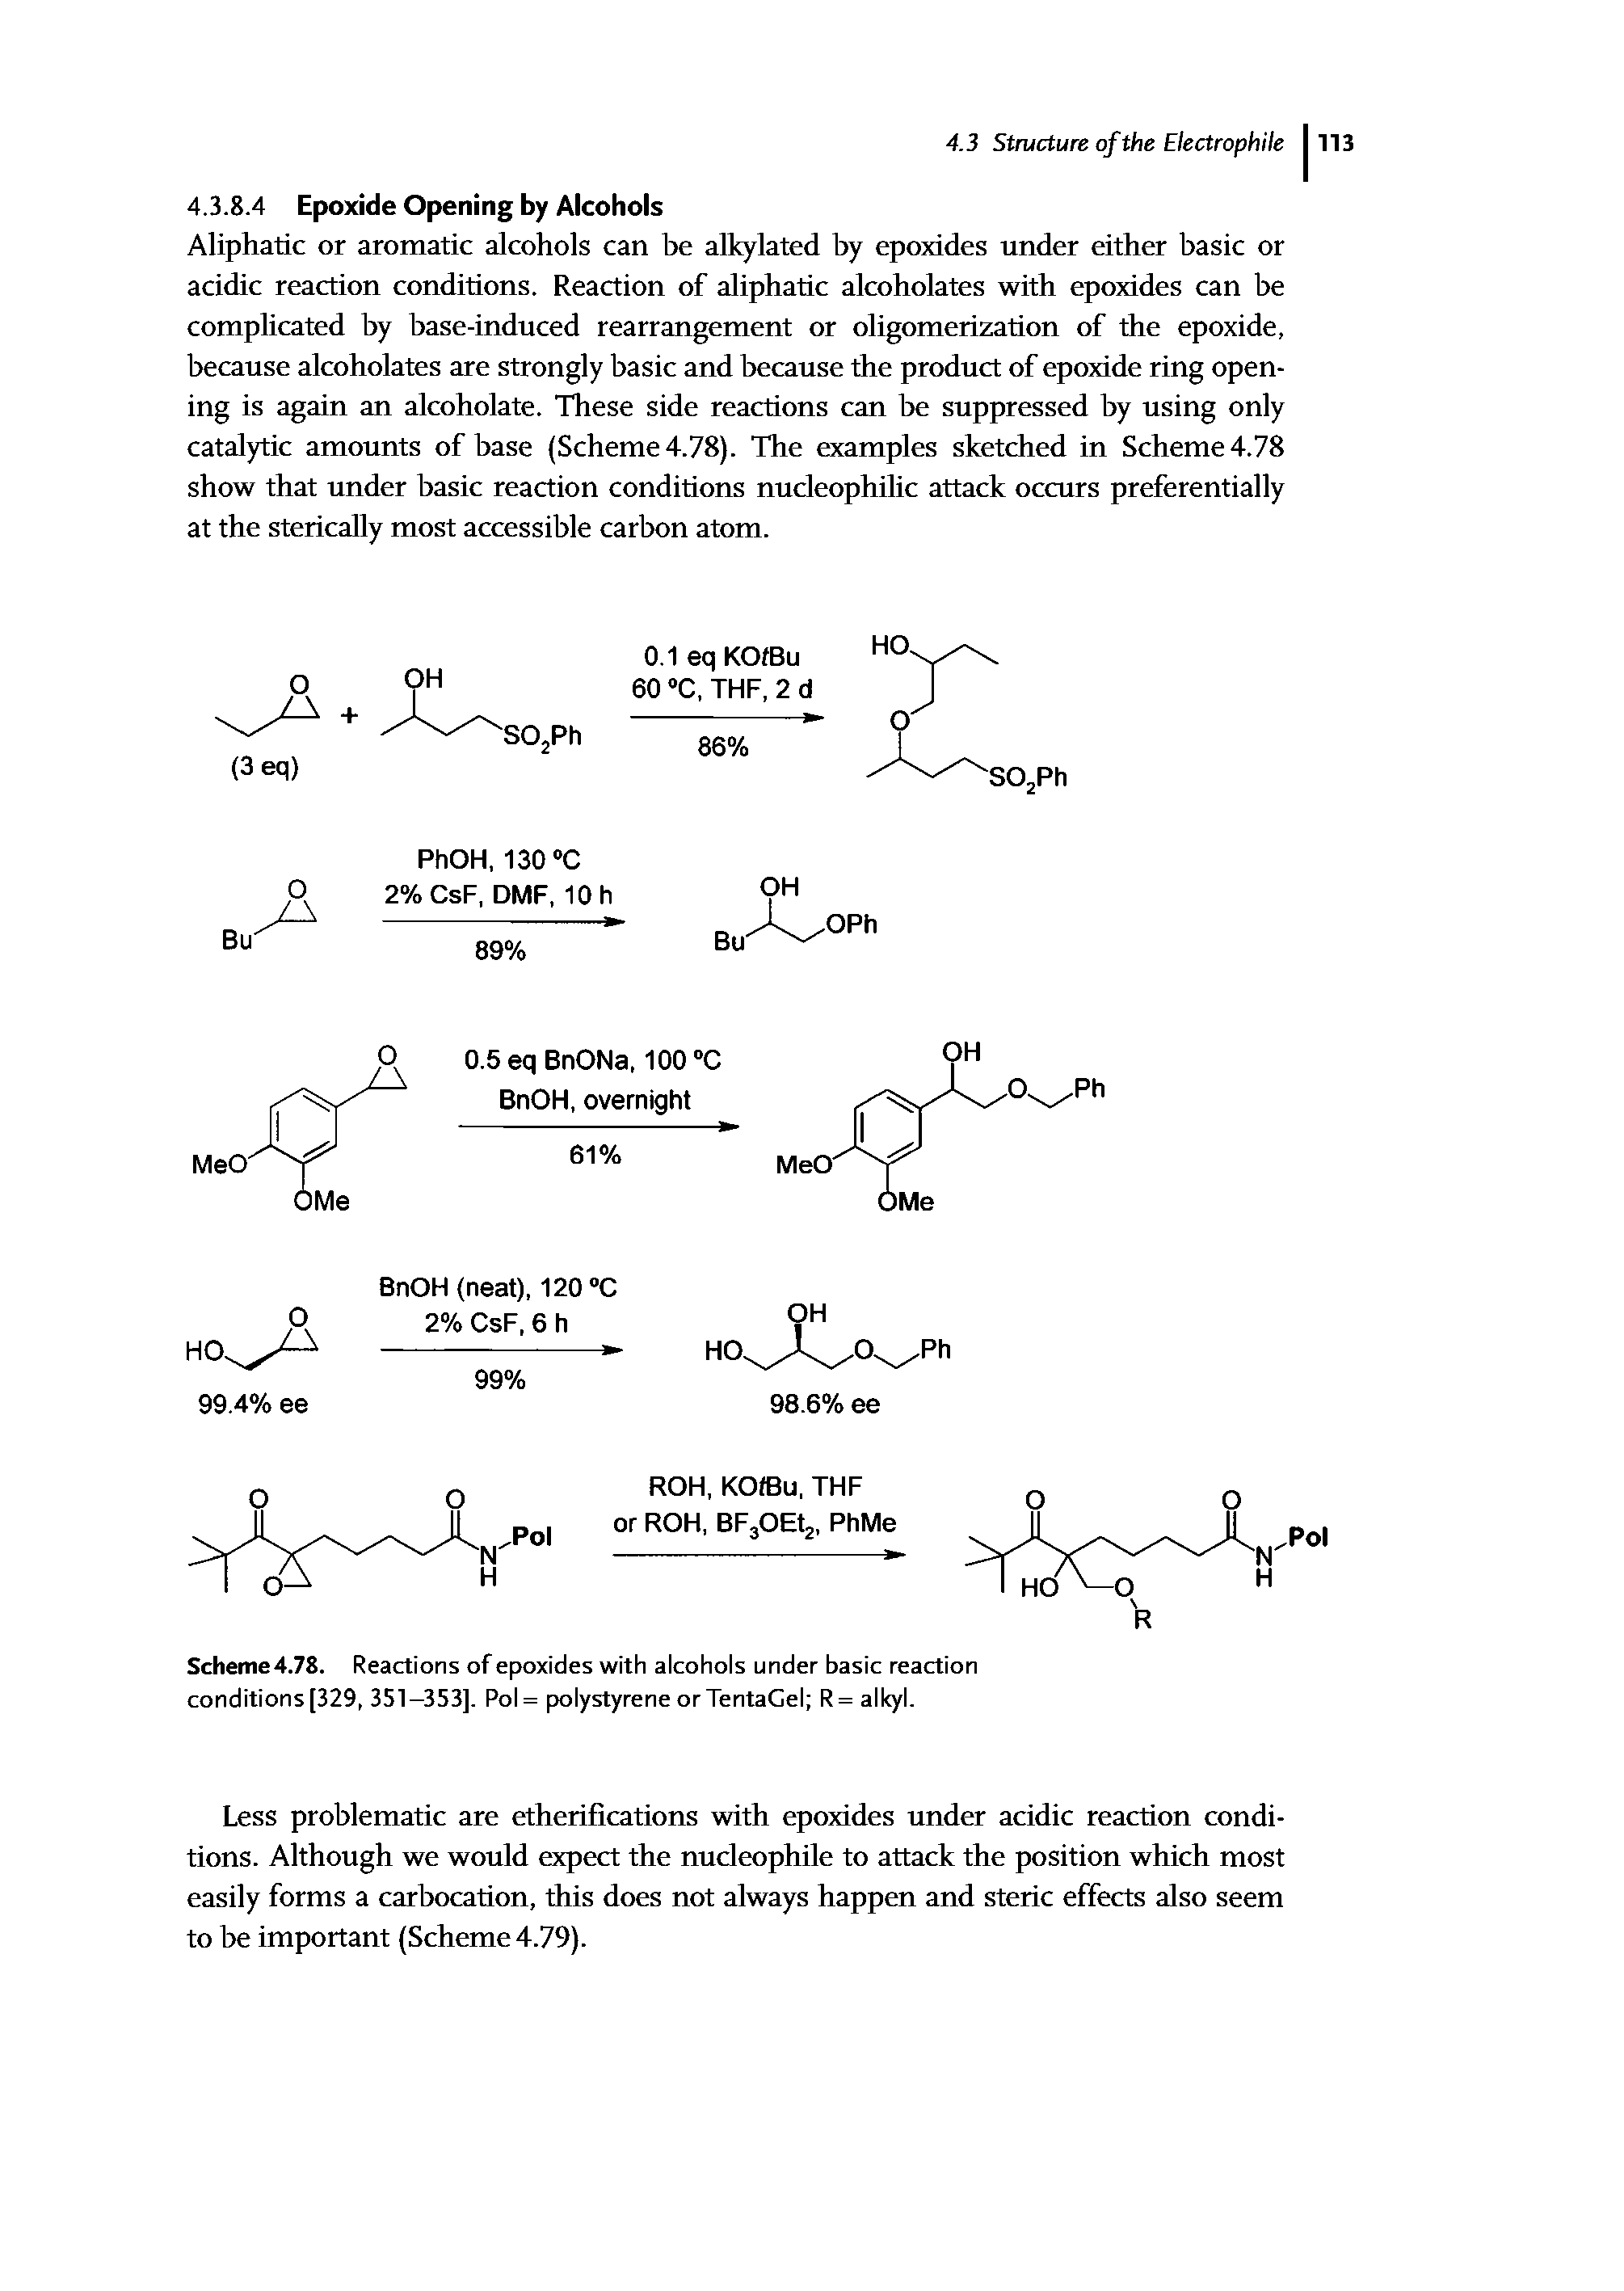 Scheme4.78. Reactions of epoxides with alcohols under basic reaction conditions[329, 351—353], Pol= polystyrene or TentaGel R= alkyl.